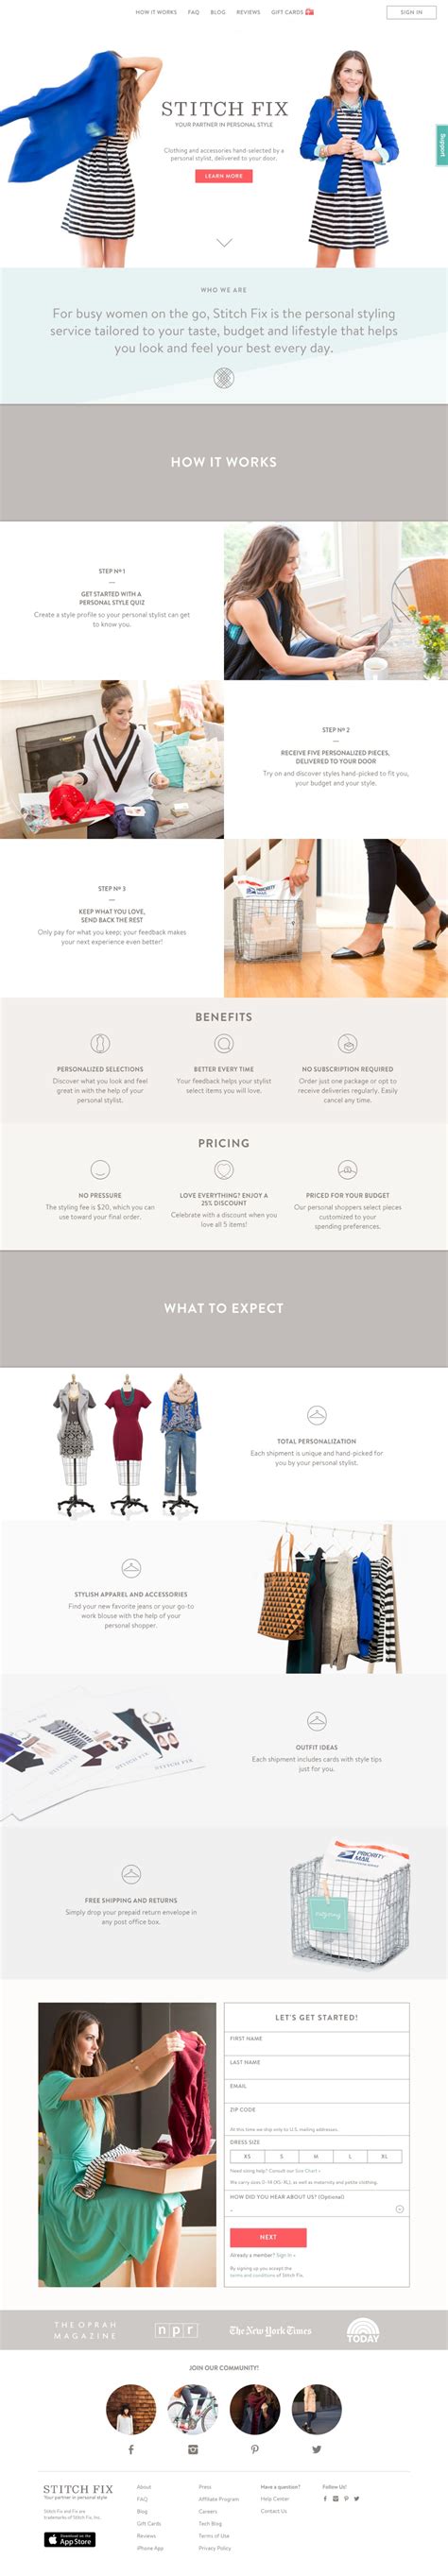 stitch fix landing page design example for inspiration landingfolio landing page design